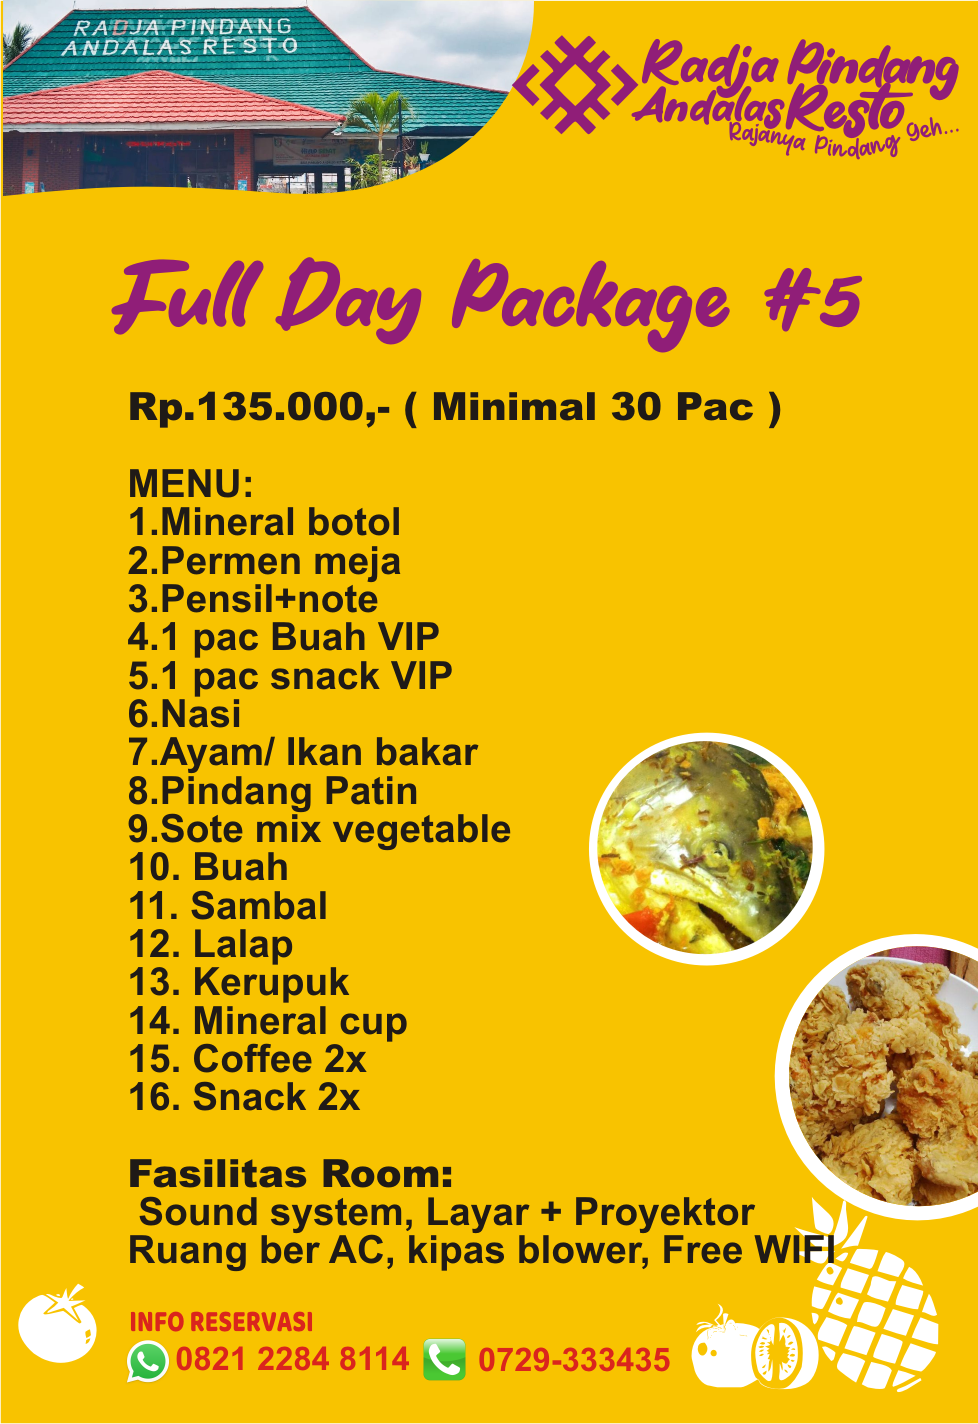 FULL DAY PACKAGE #5